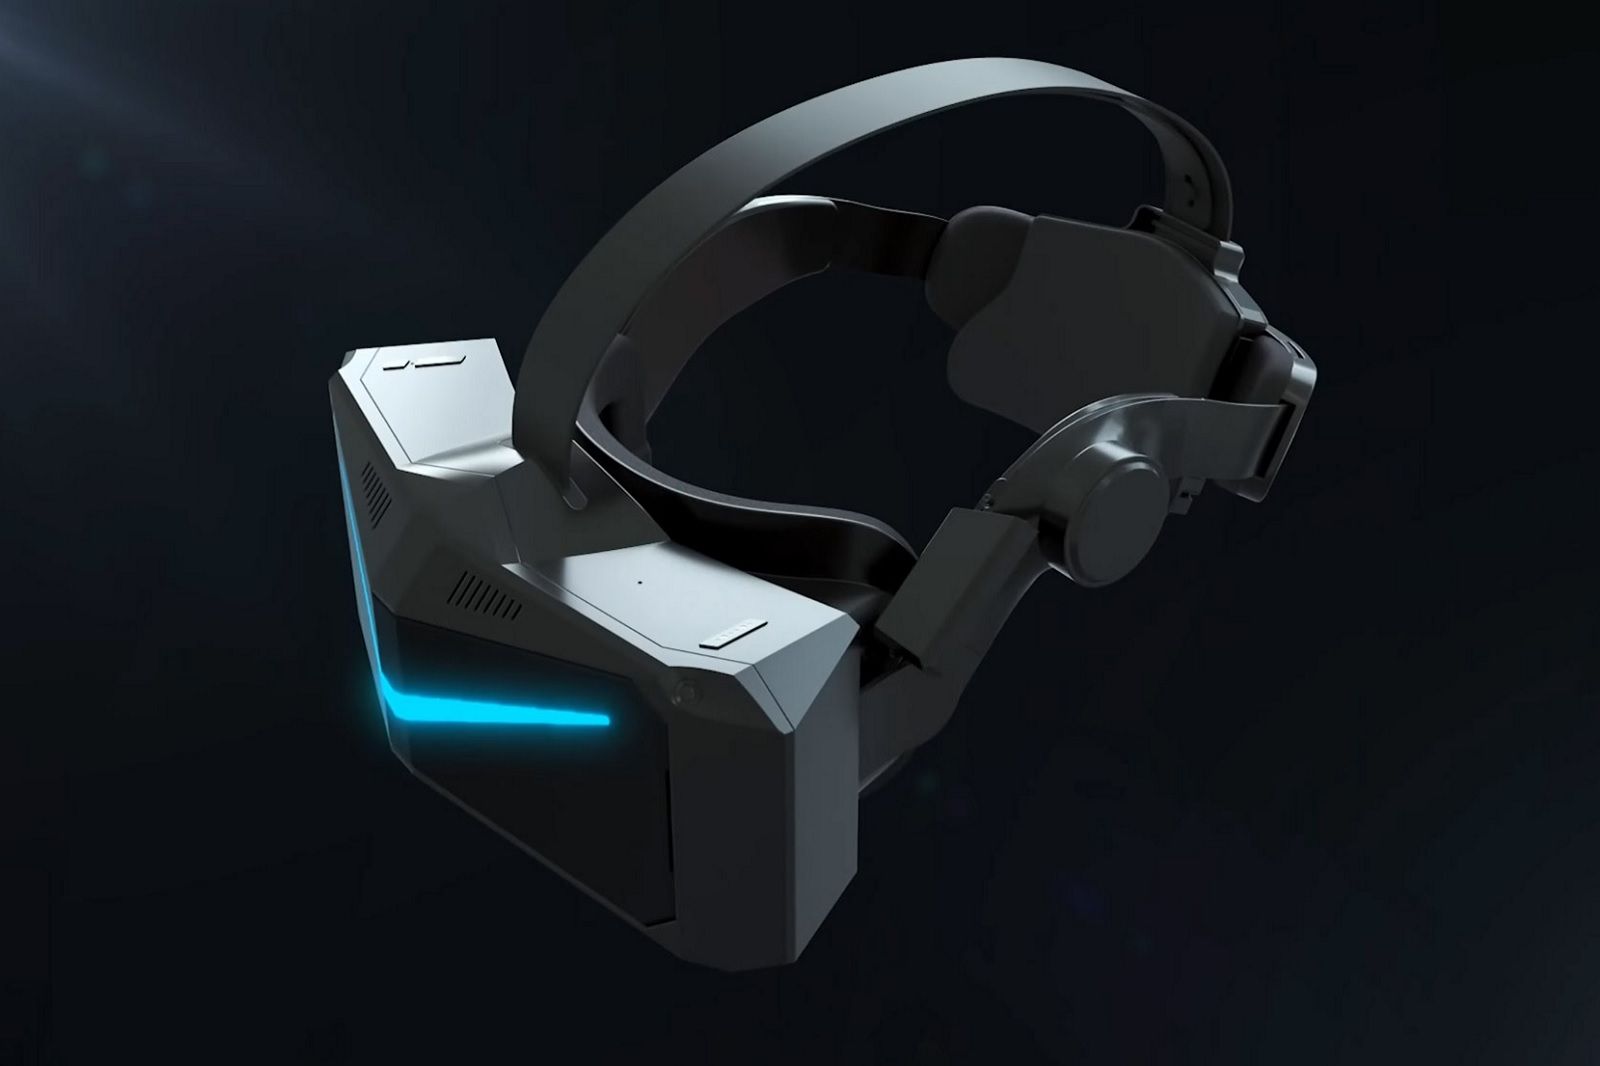 Upcoming Pimax headset boasts 12K visuals, standalone functionality and more photo 1